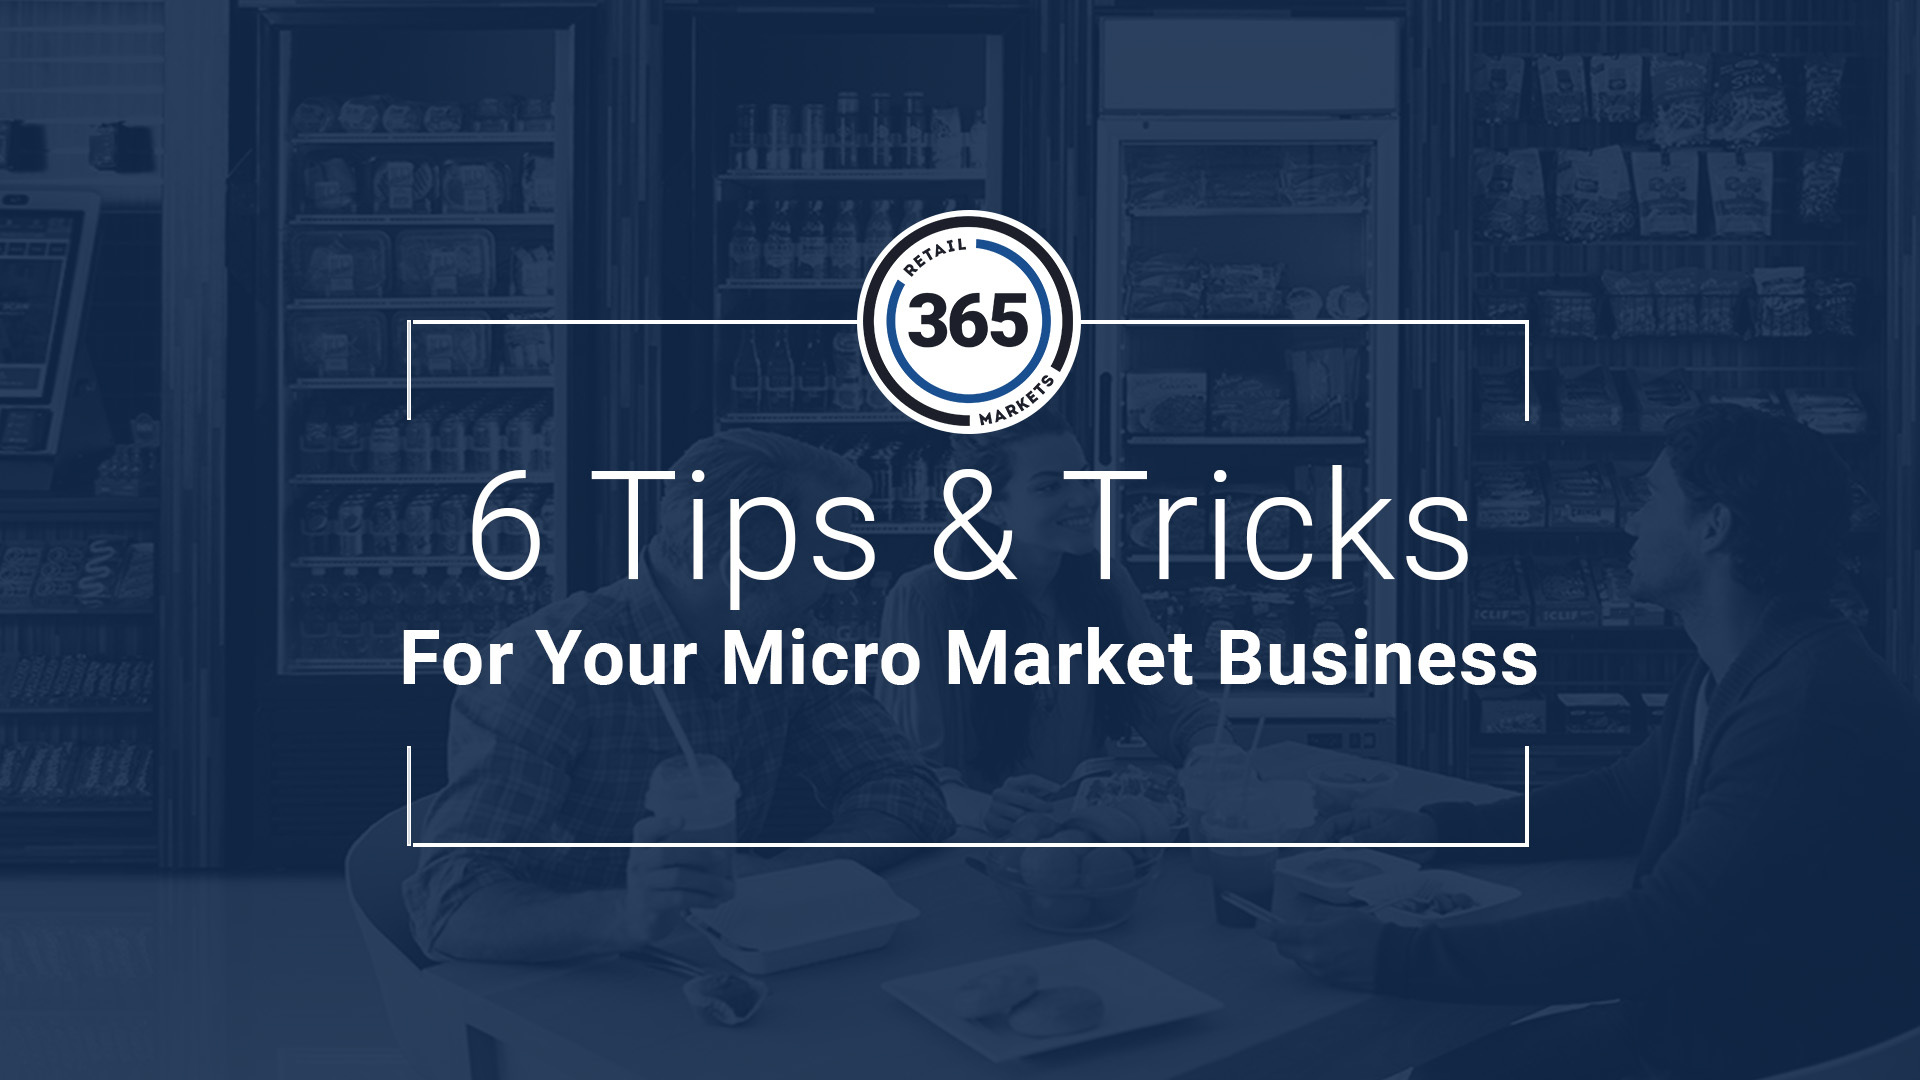 6 Tips & Tricks for Your Micro Market Business